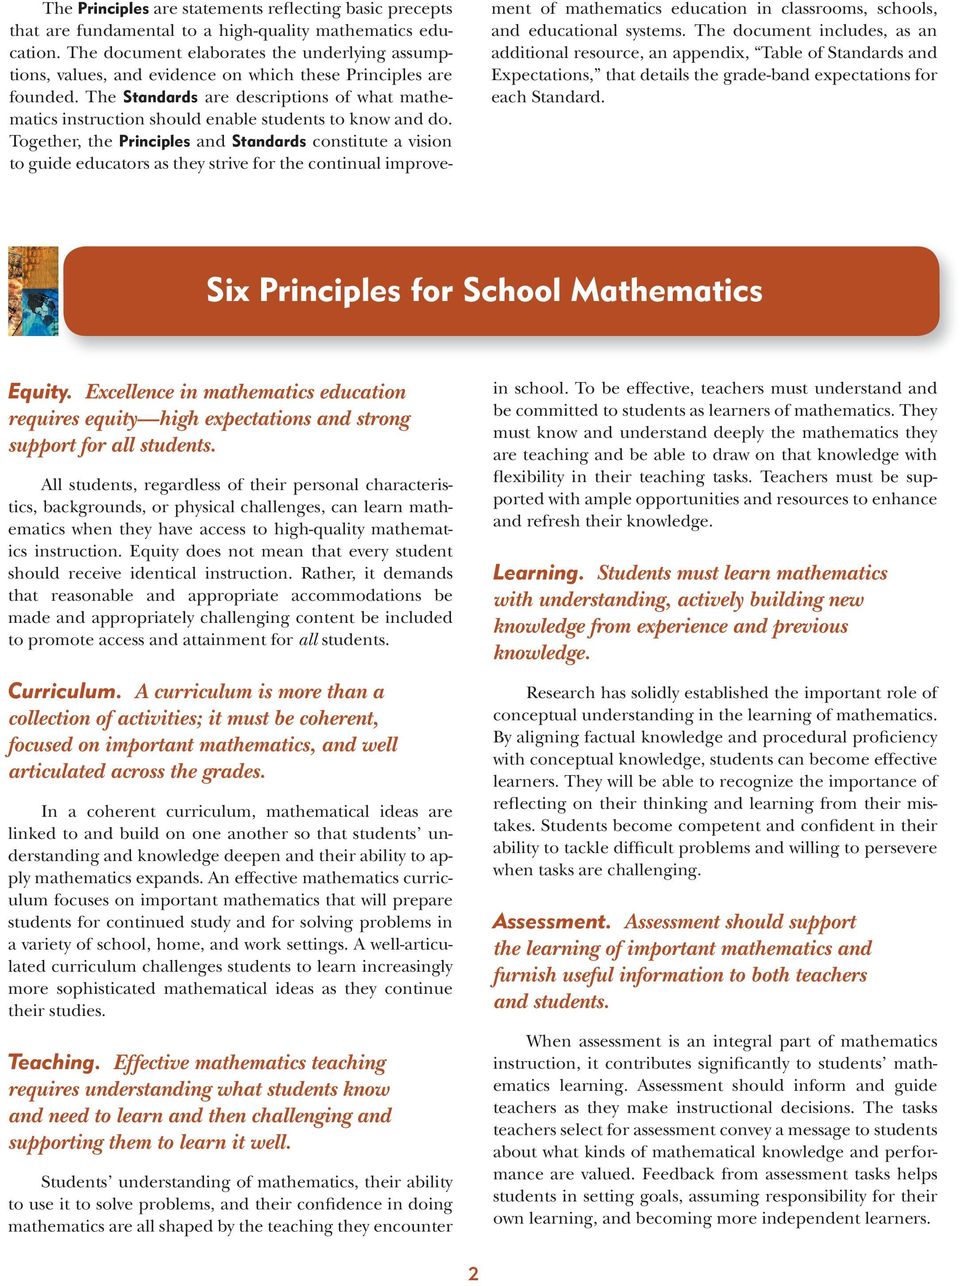 Six Principles for School Mathematics Equity. Excellence in mathematics education requires equity high expectations and strong support for all students.